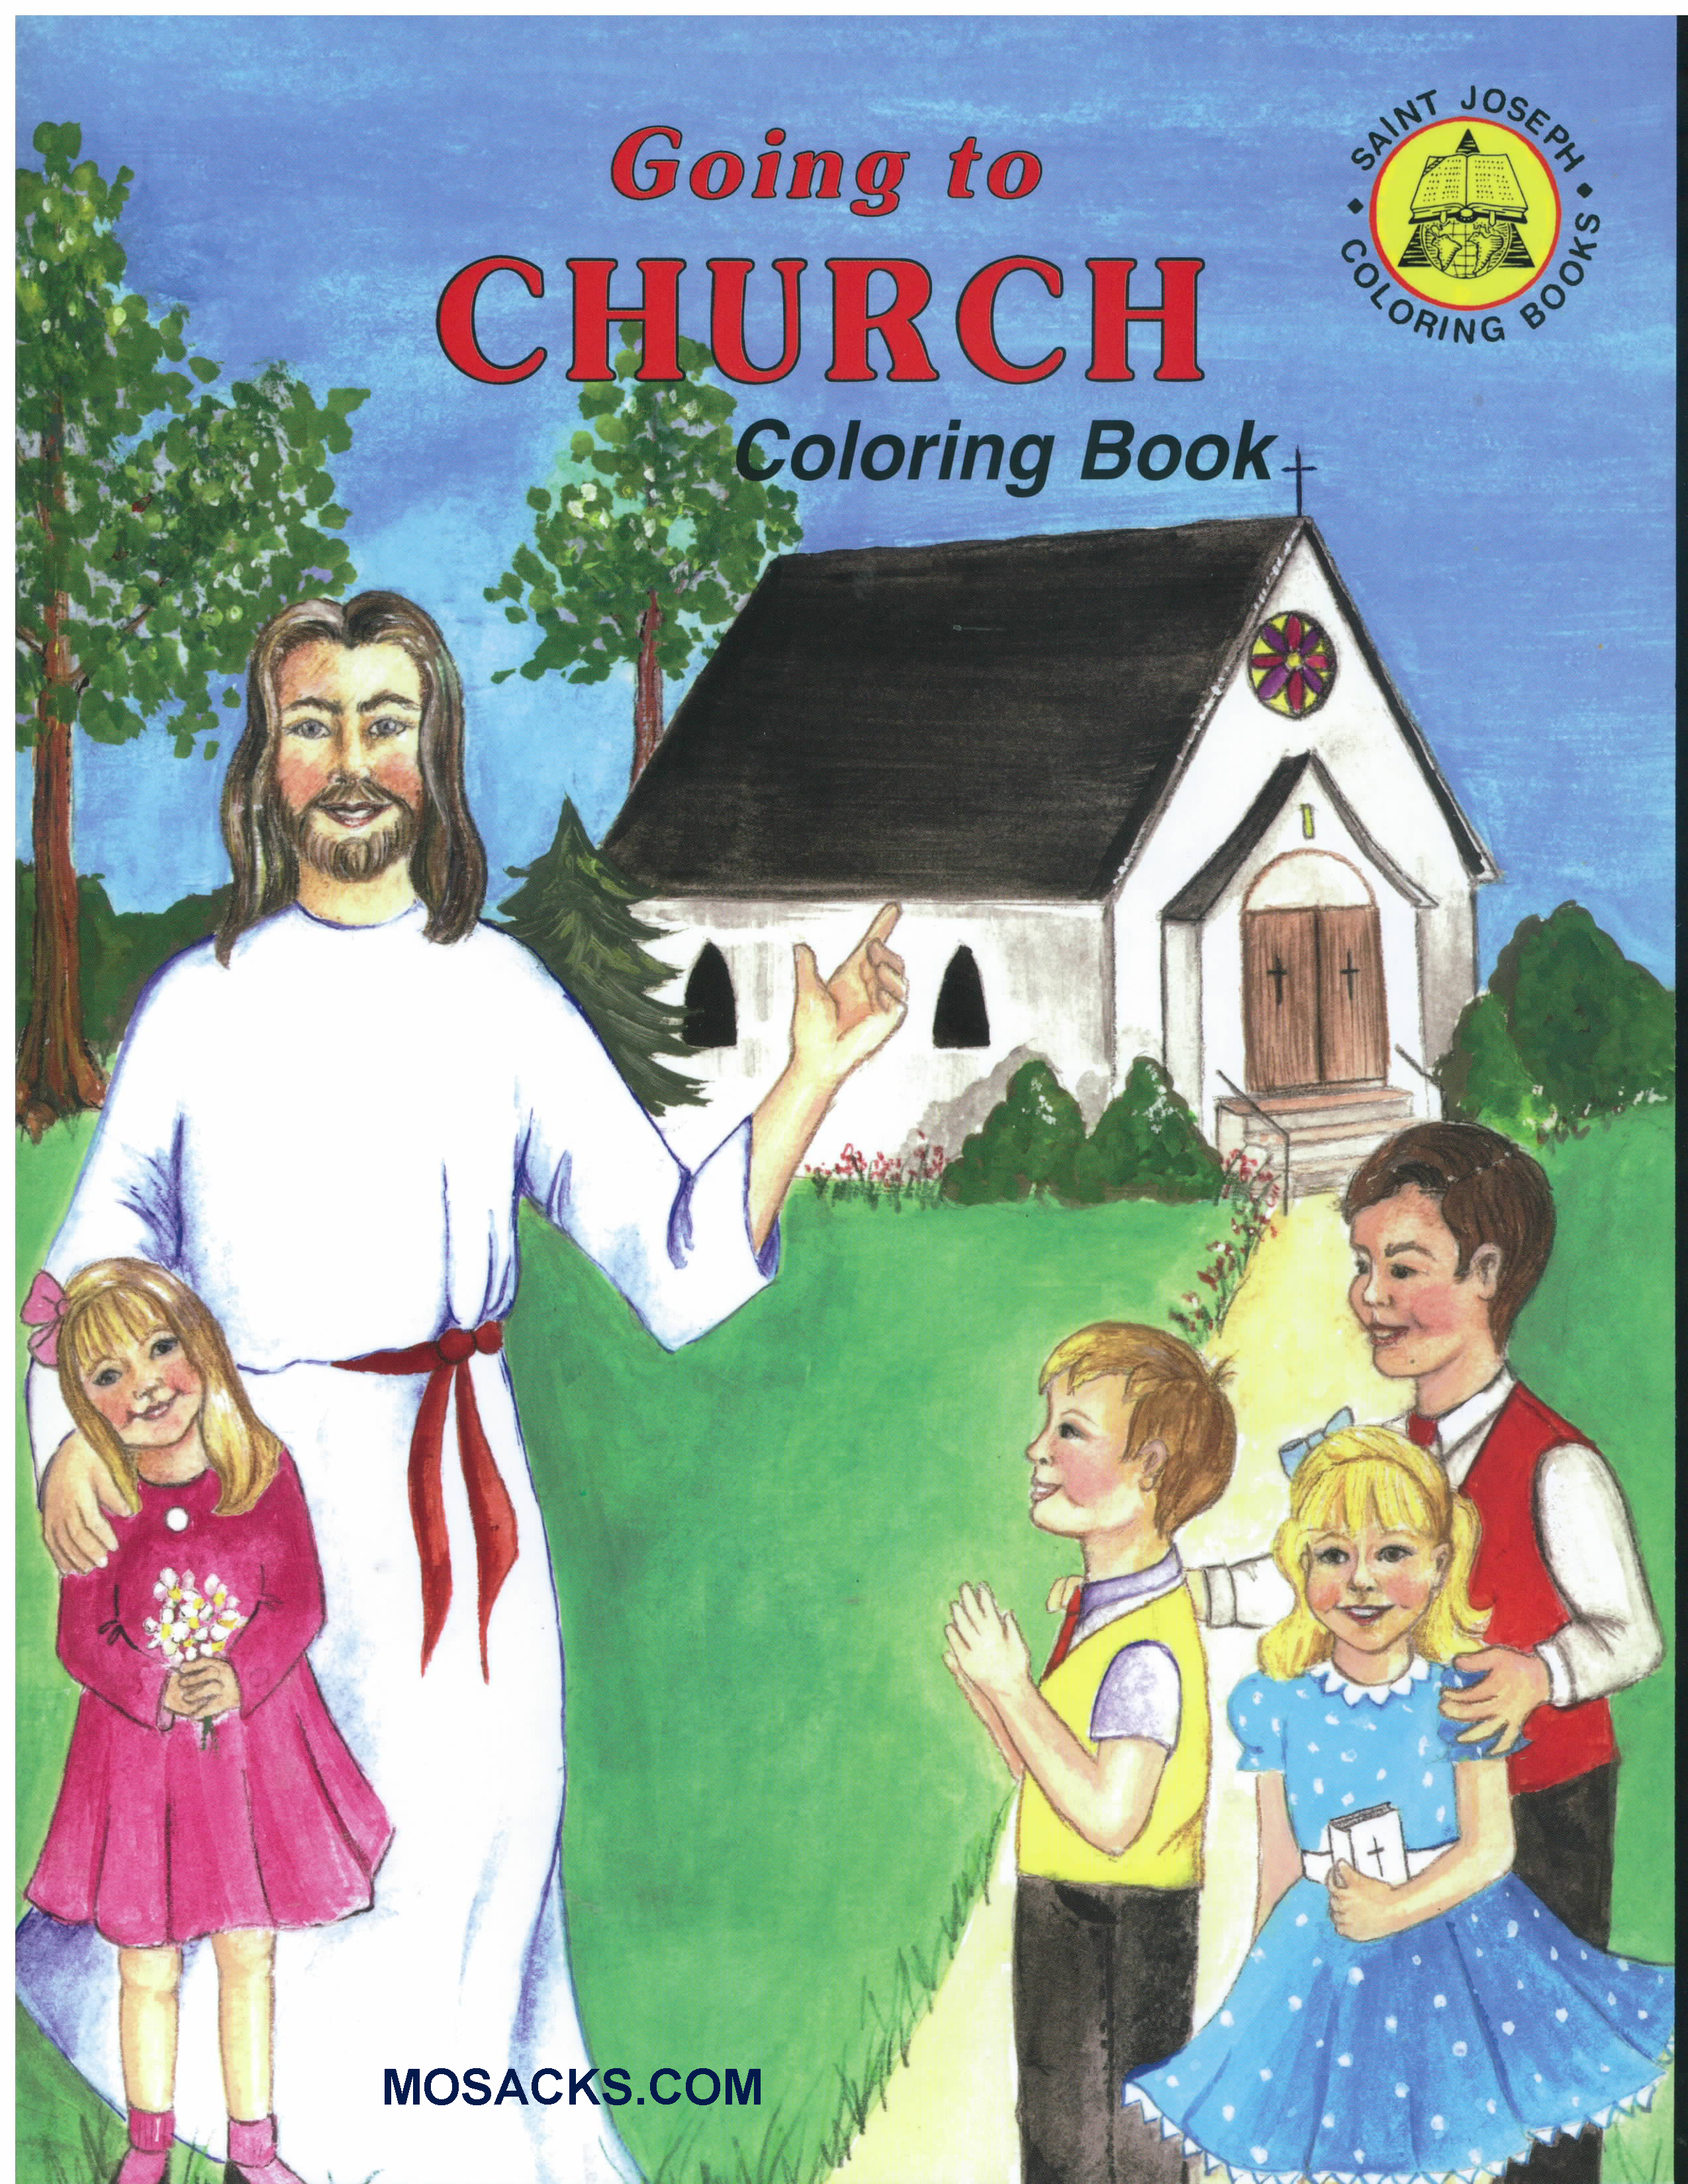 St Joseph 32 page Coloring Book Going To Church-694